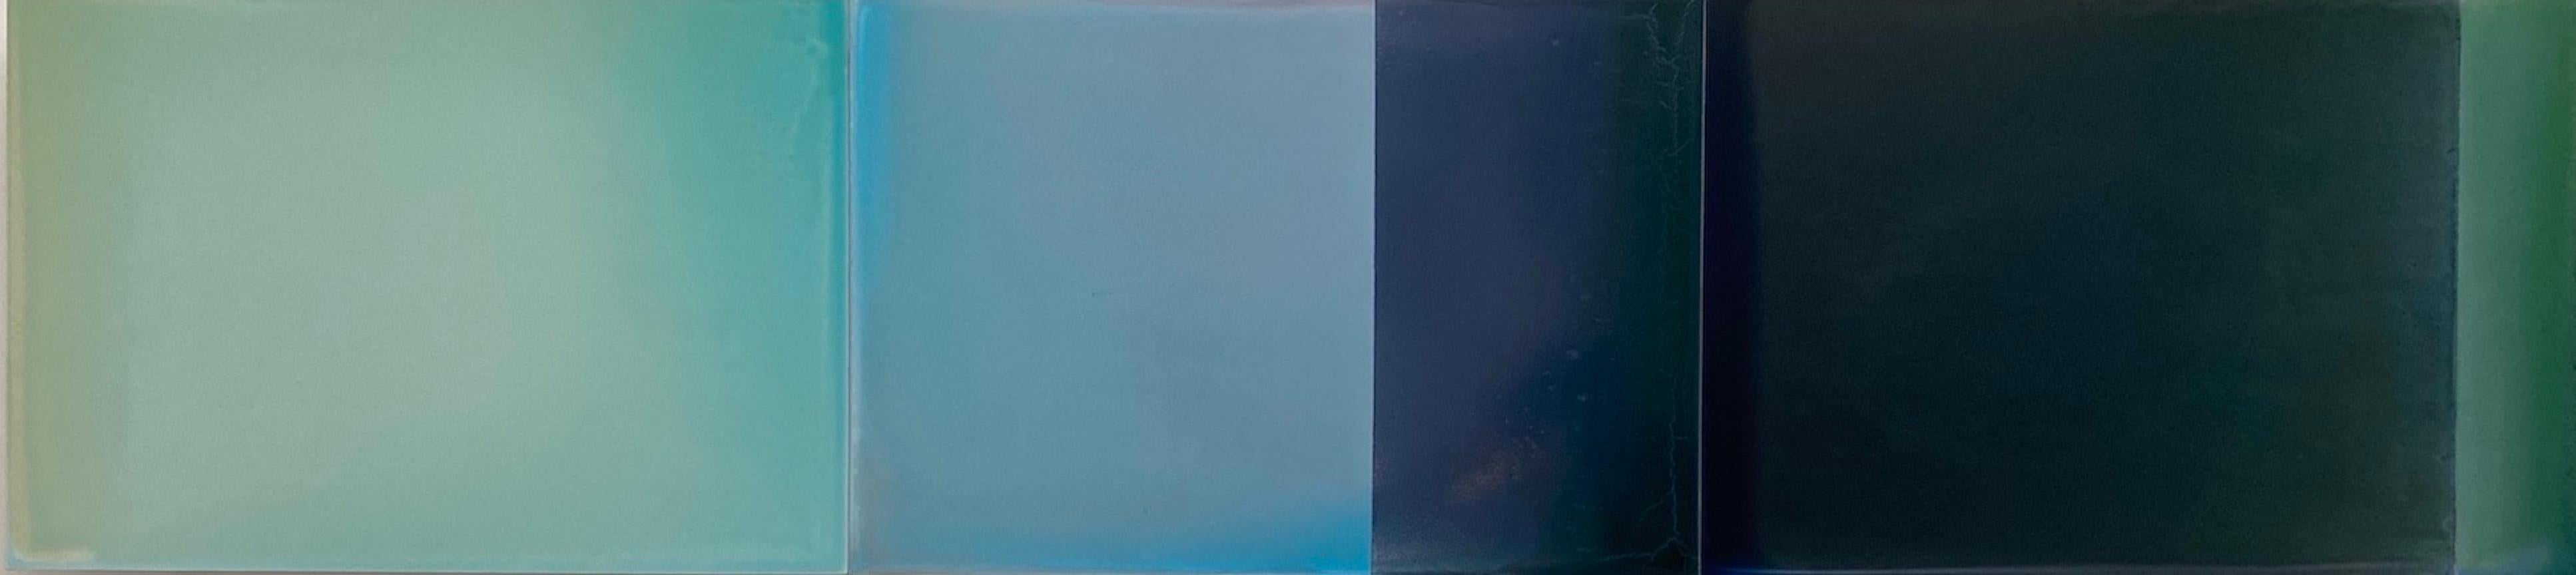 Two Stories No. Two, Pale Teal Green, Dark Indigo Horizontal Glossy Painting